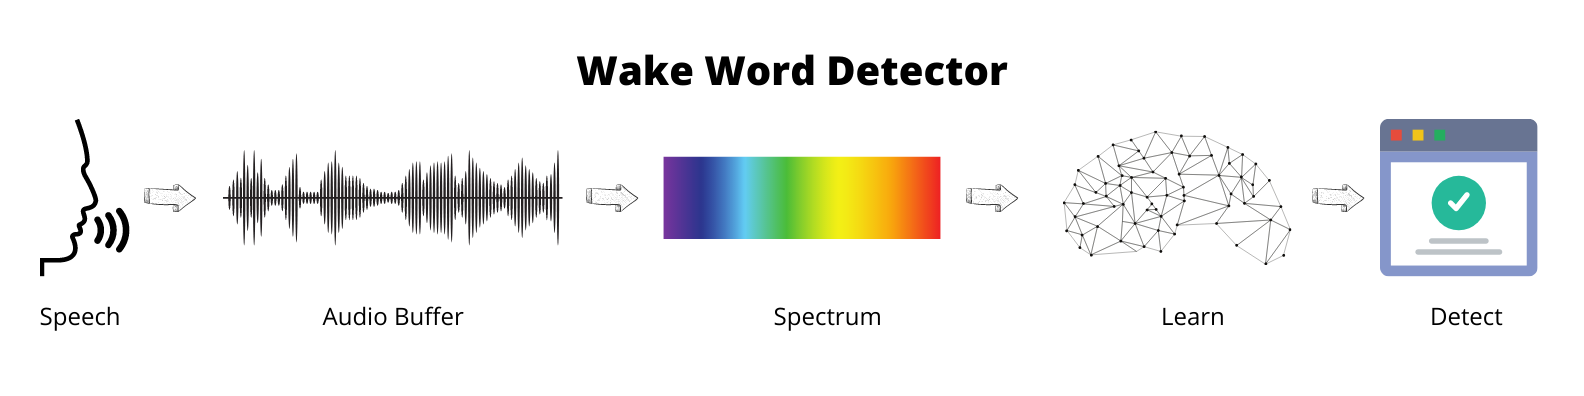 How to build your own wake word detector